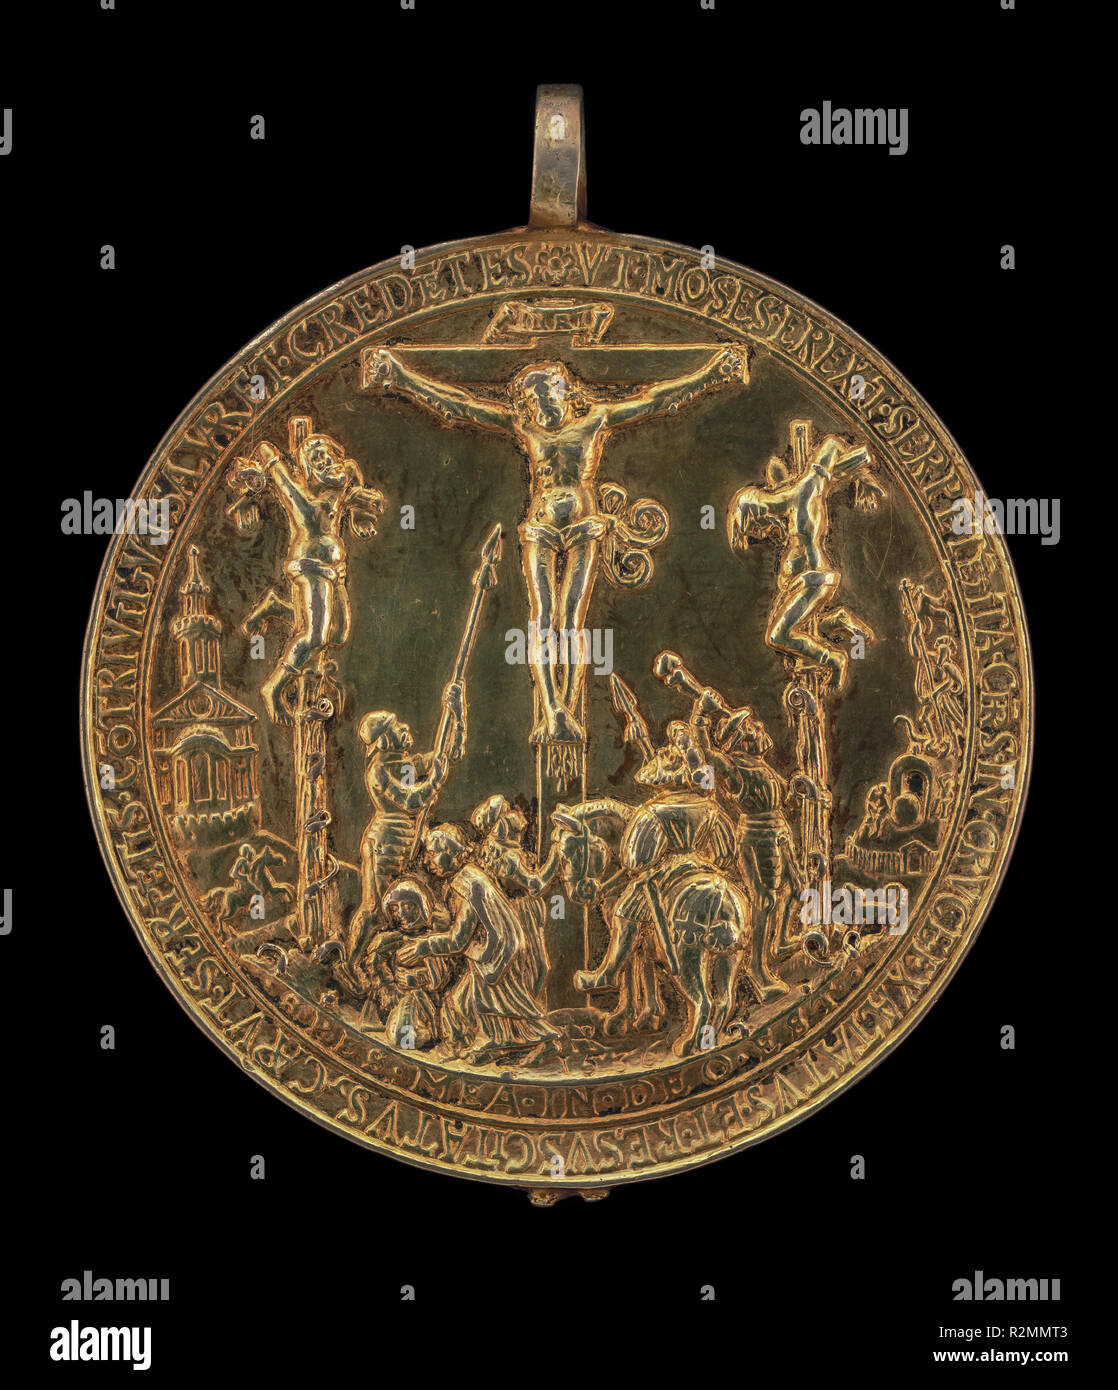 The Crucifixion [reverse]. Dated: 1536. Dimensions: overall (diameter without loop): 6.82 cm (2 11/16 in.)  overall (diameter with loop): 7.9 cm (3 1/8 in.). Medium: gilded bronze. Museum: National Gallery of Art, Washington DC. Author: Hans Reinhart the Elder. Stock Photo